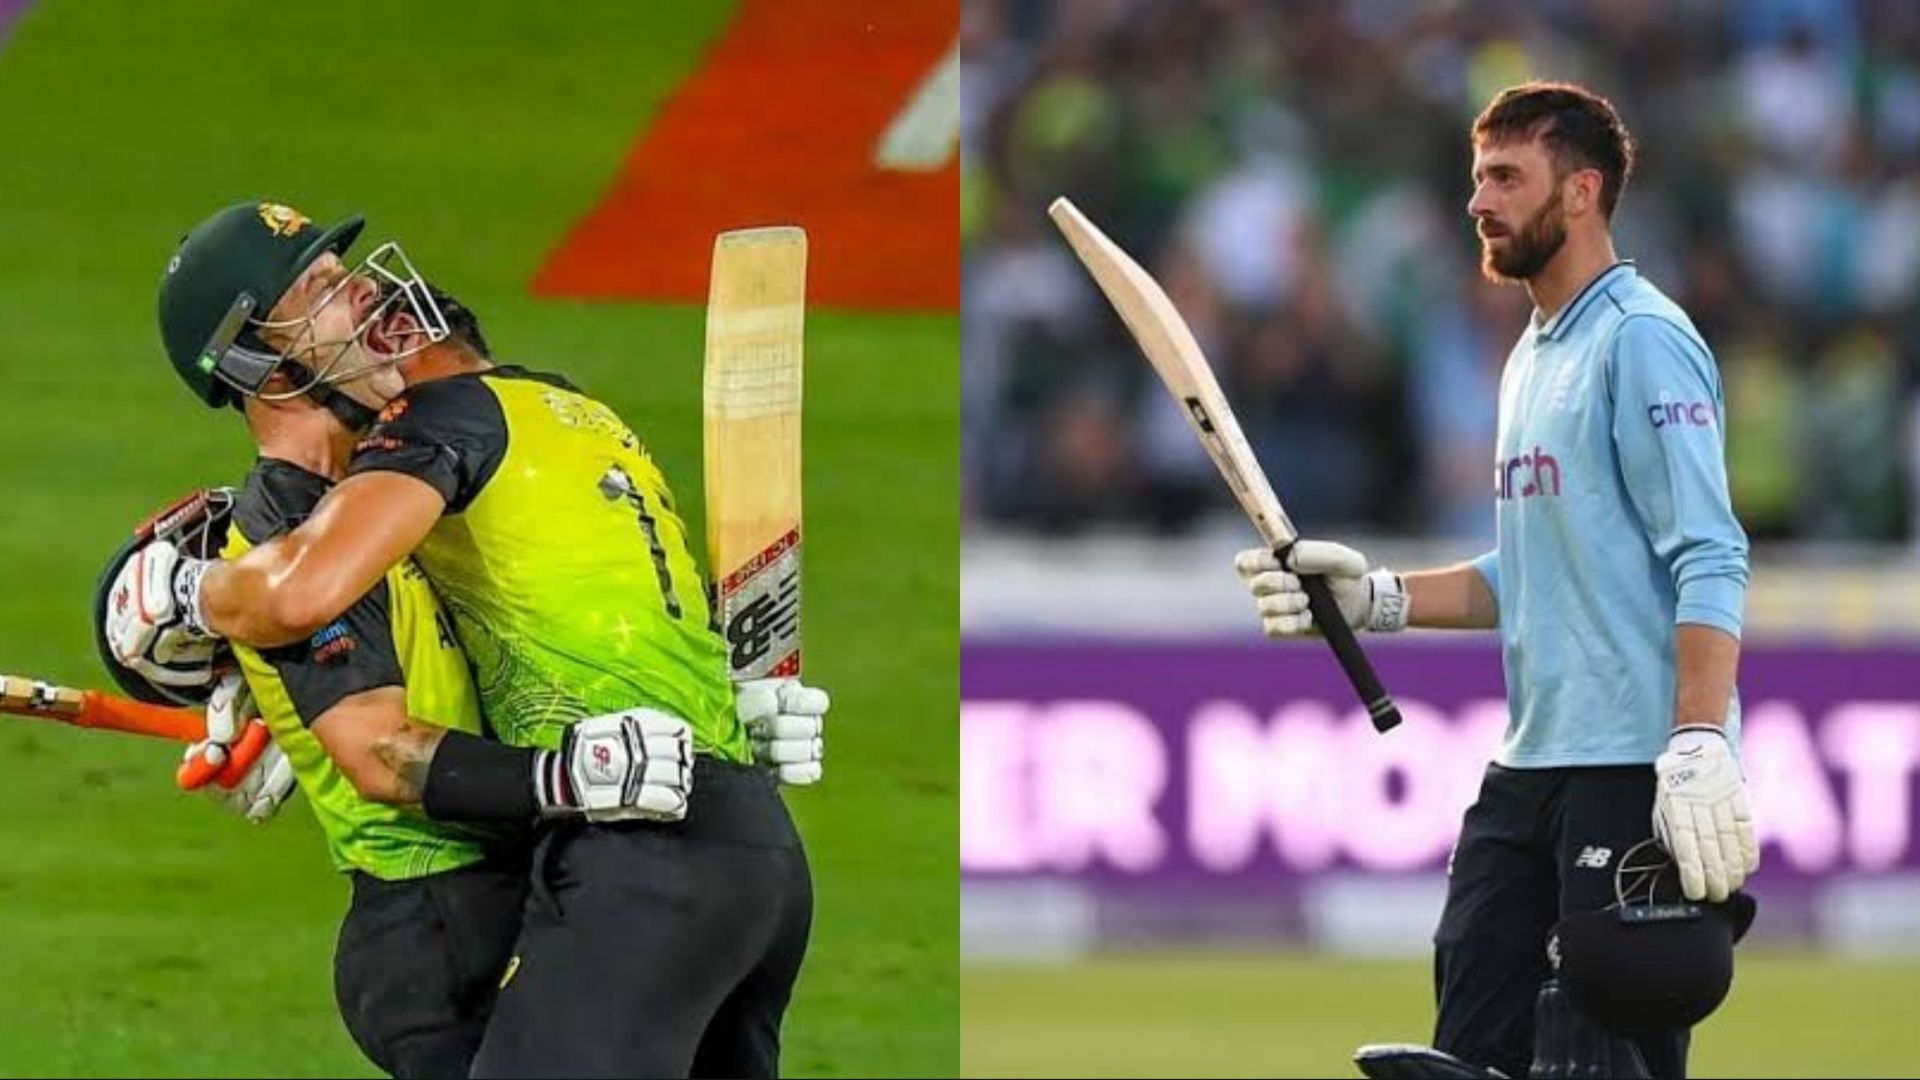 Matthew Wade and James Vince are likely to be part of IPL Auction 2022